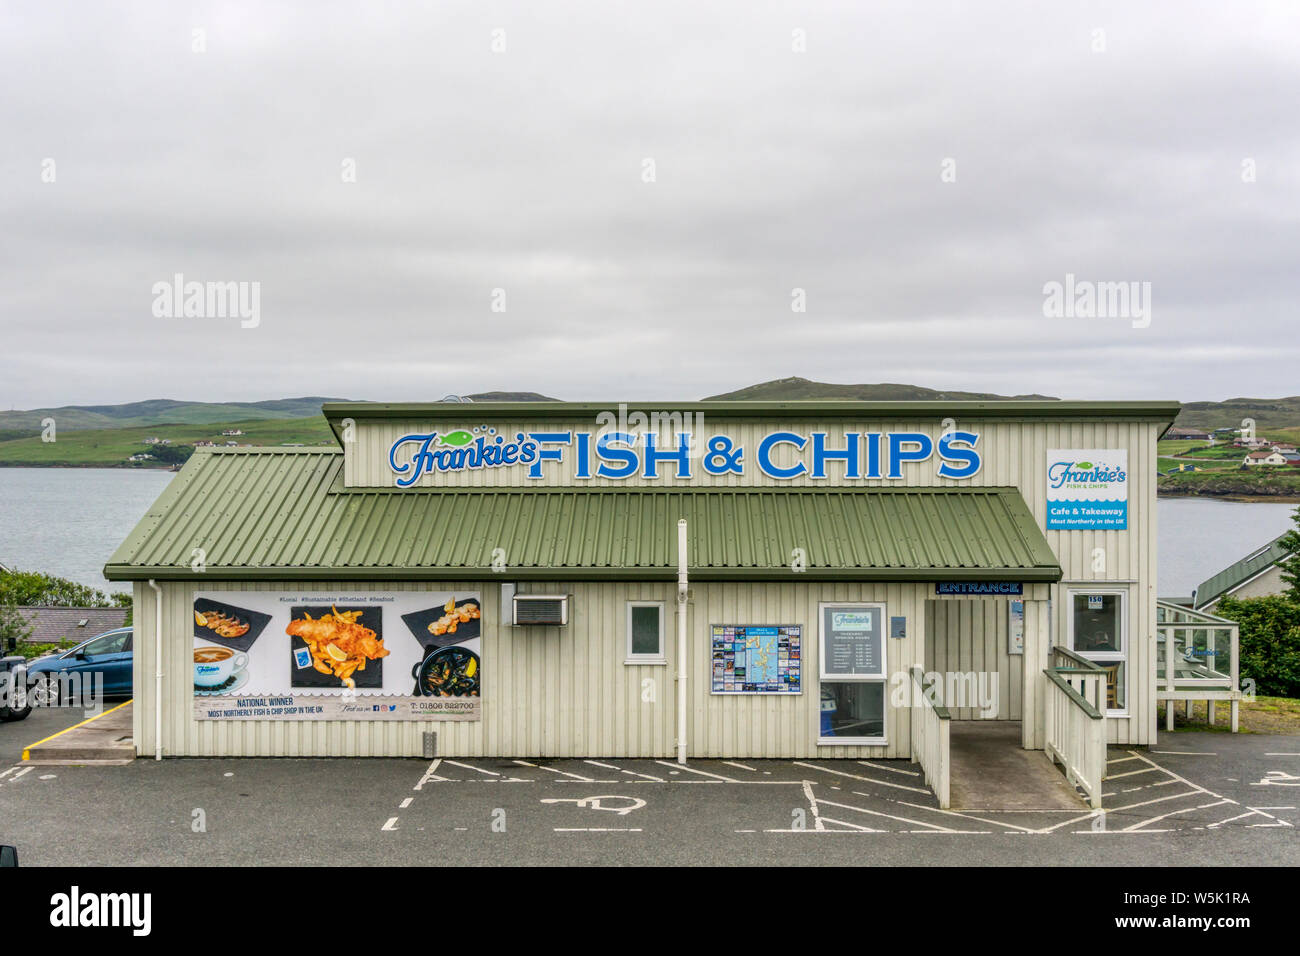 Frankie's Fish & Chips in Brae, Shetland, is the most northerly fish & chip shop in the UK. Winner of the  National Fish & Chip Awards 2015. Stock Photo